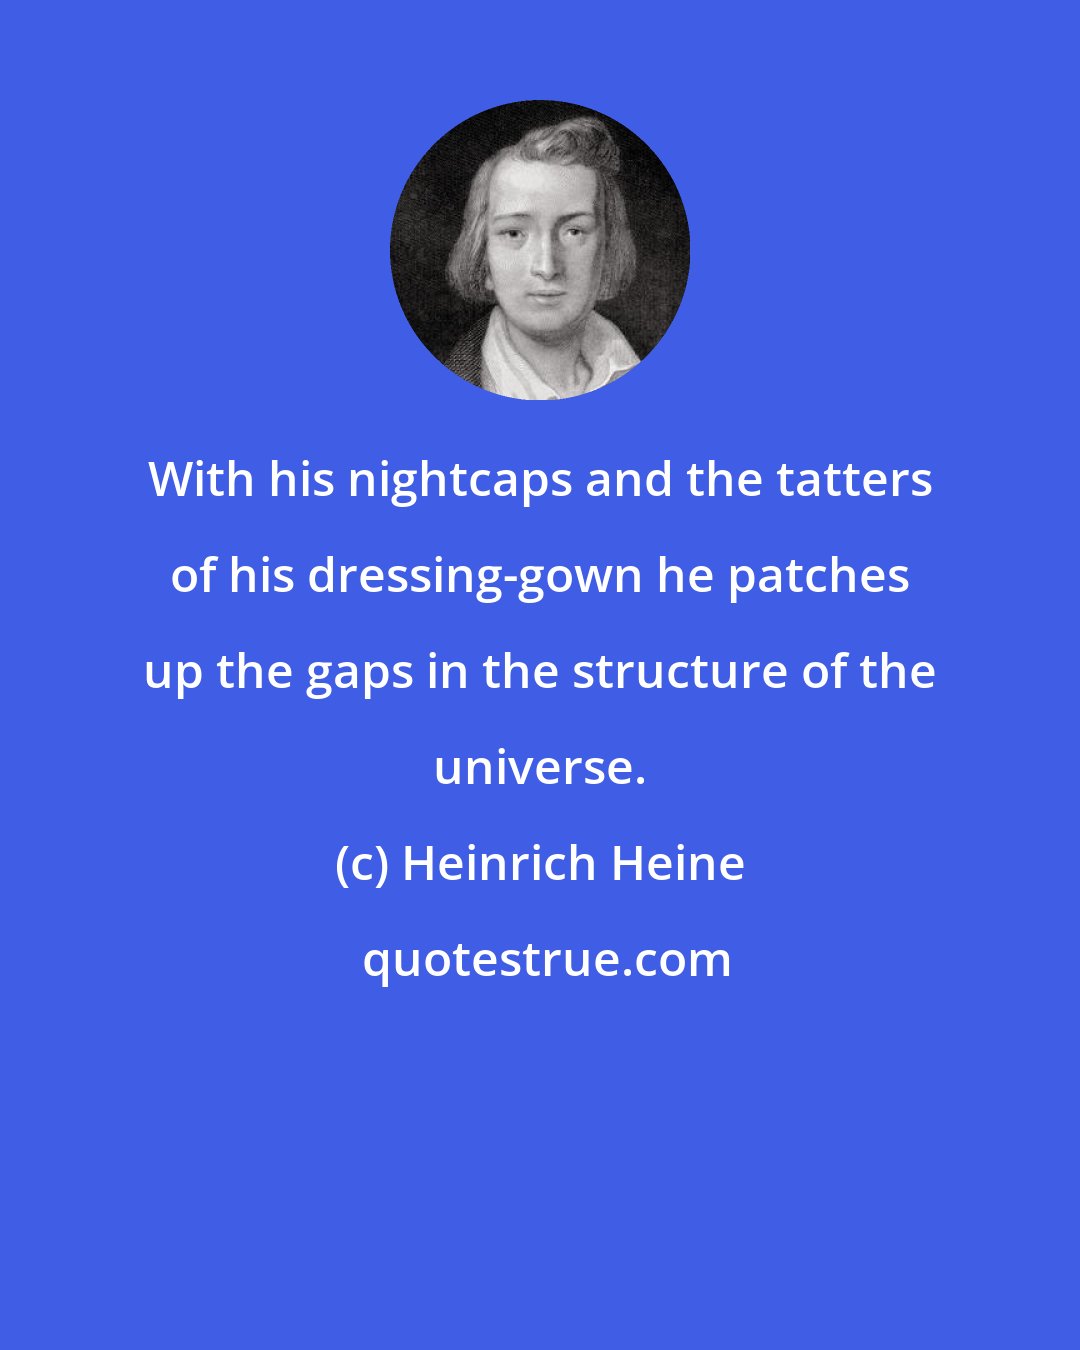 Heinrich Heine: With his nightcaps and the tatters of his dressing-gown he patches up the gaps in the structure of the universe.